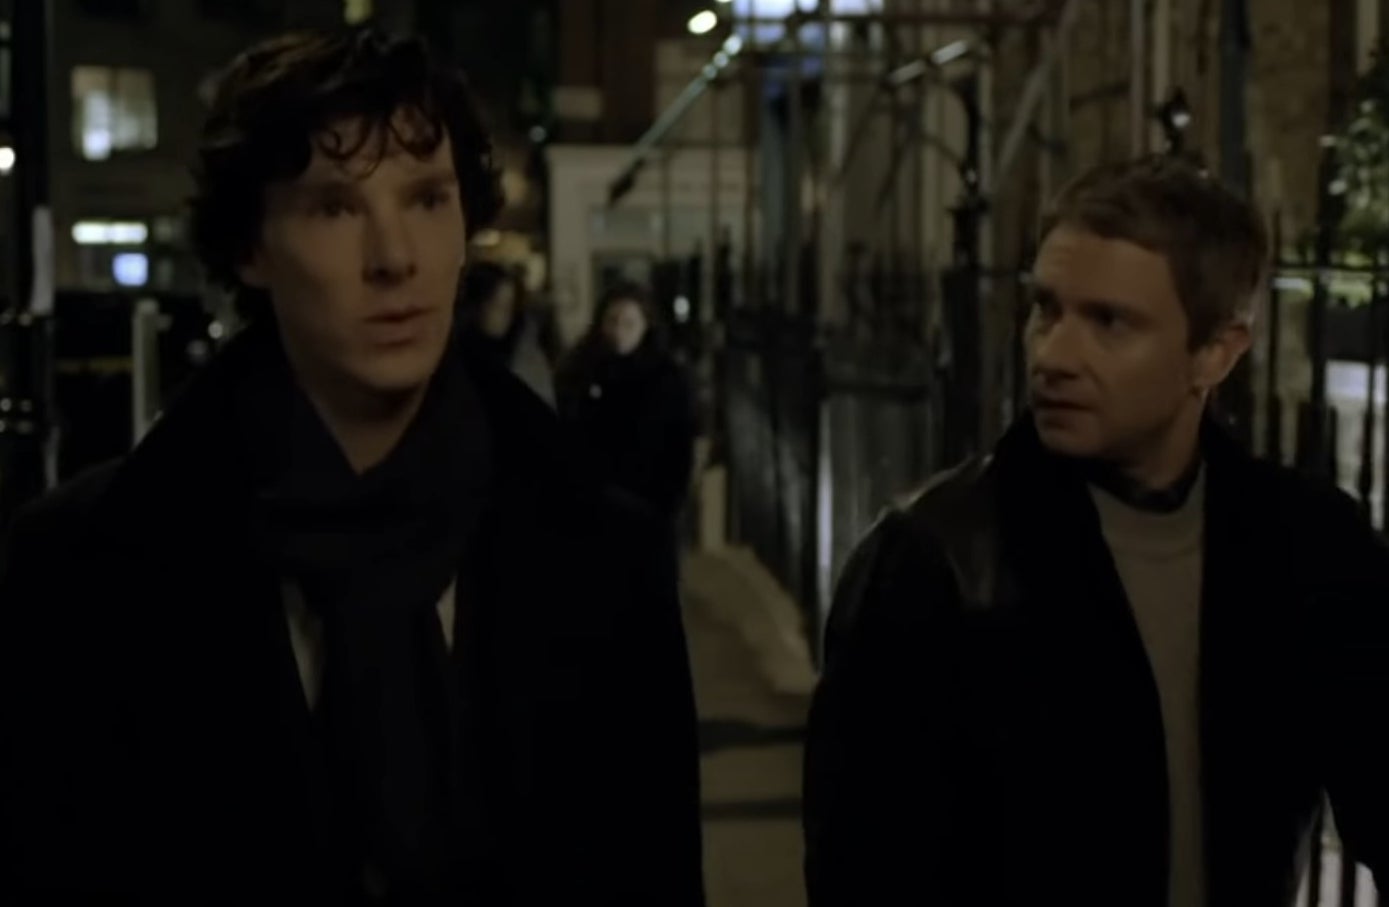 Sherlock and Watson walking down a street together at night in &quot;Sherlock&quot;